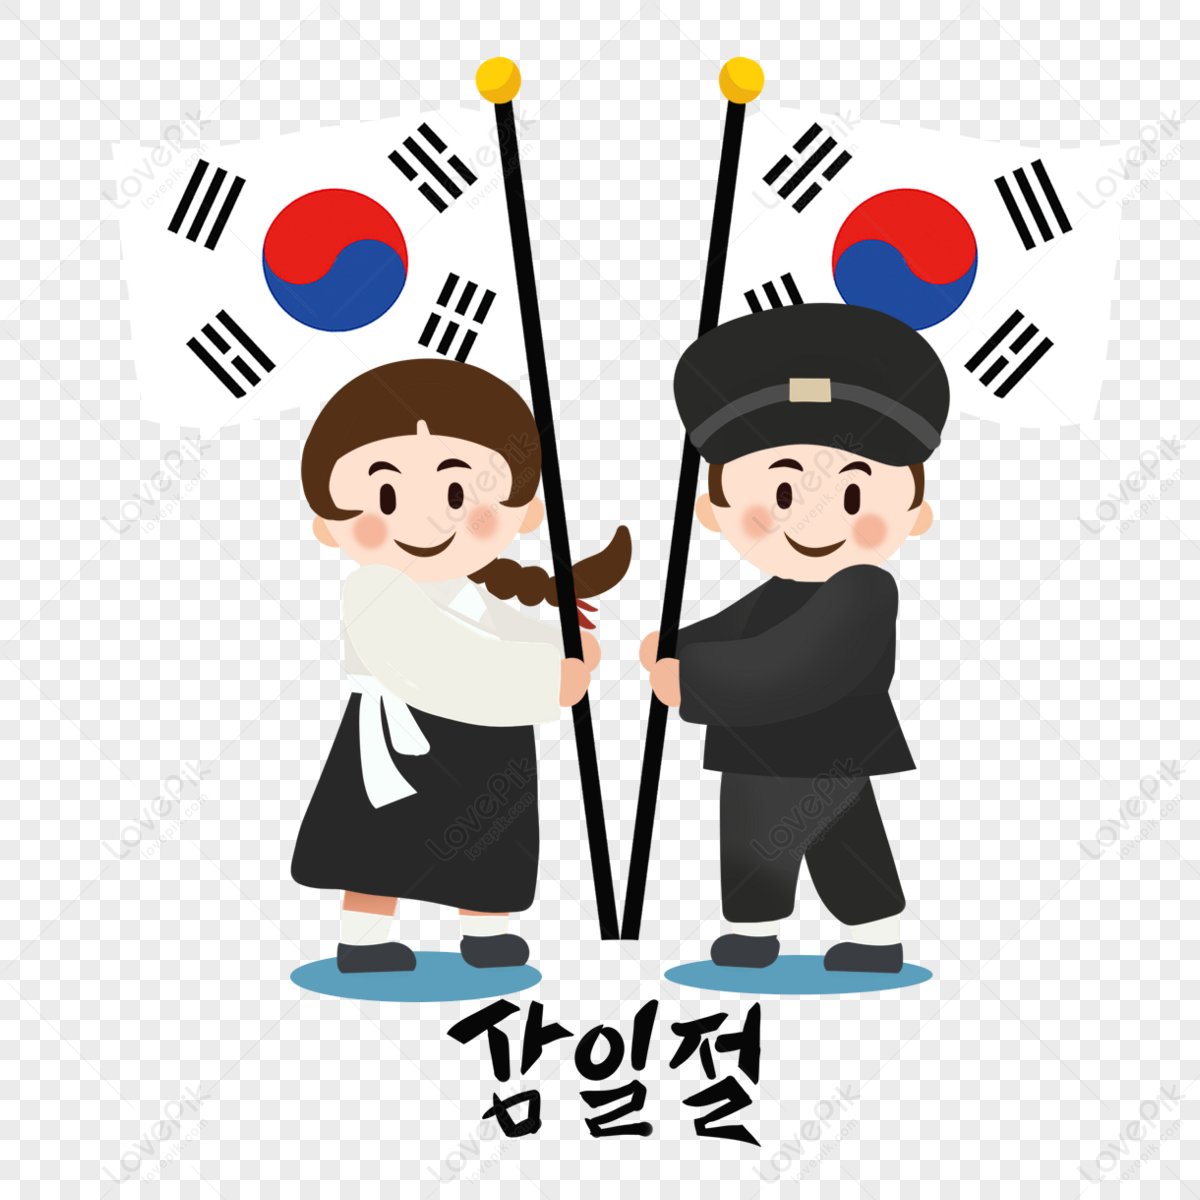 Two March First Movement figures in South Korea holding the flag png transparent background